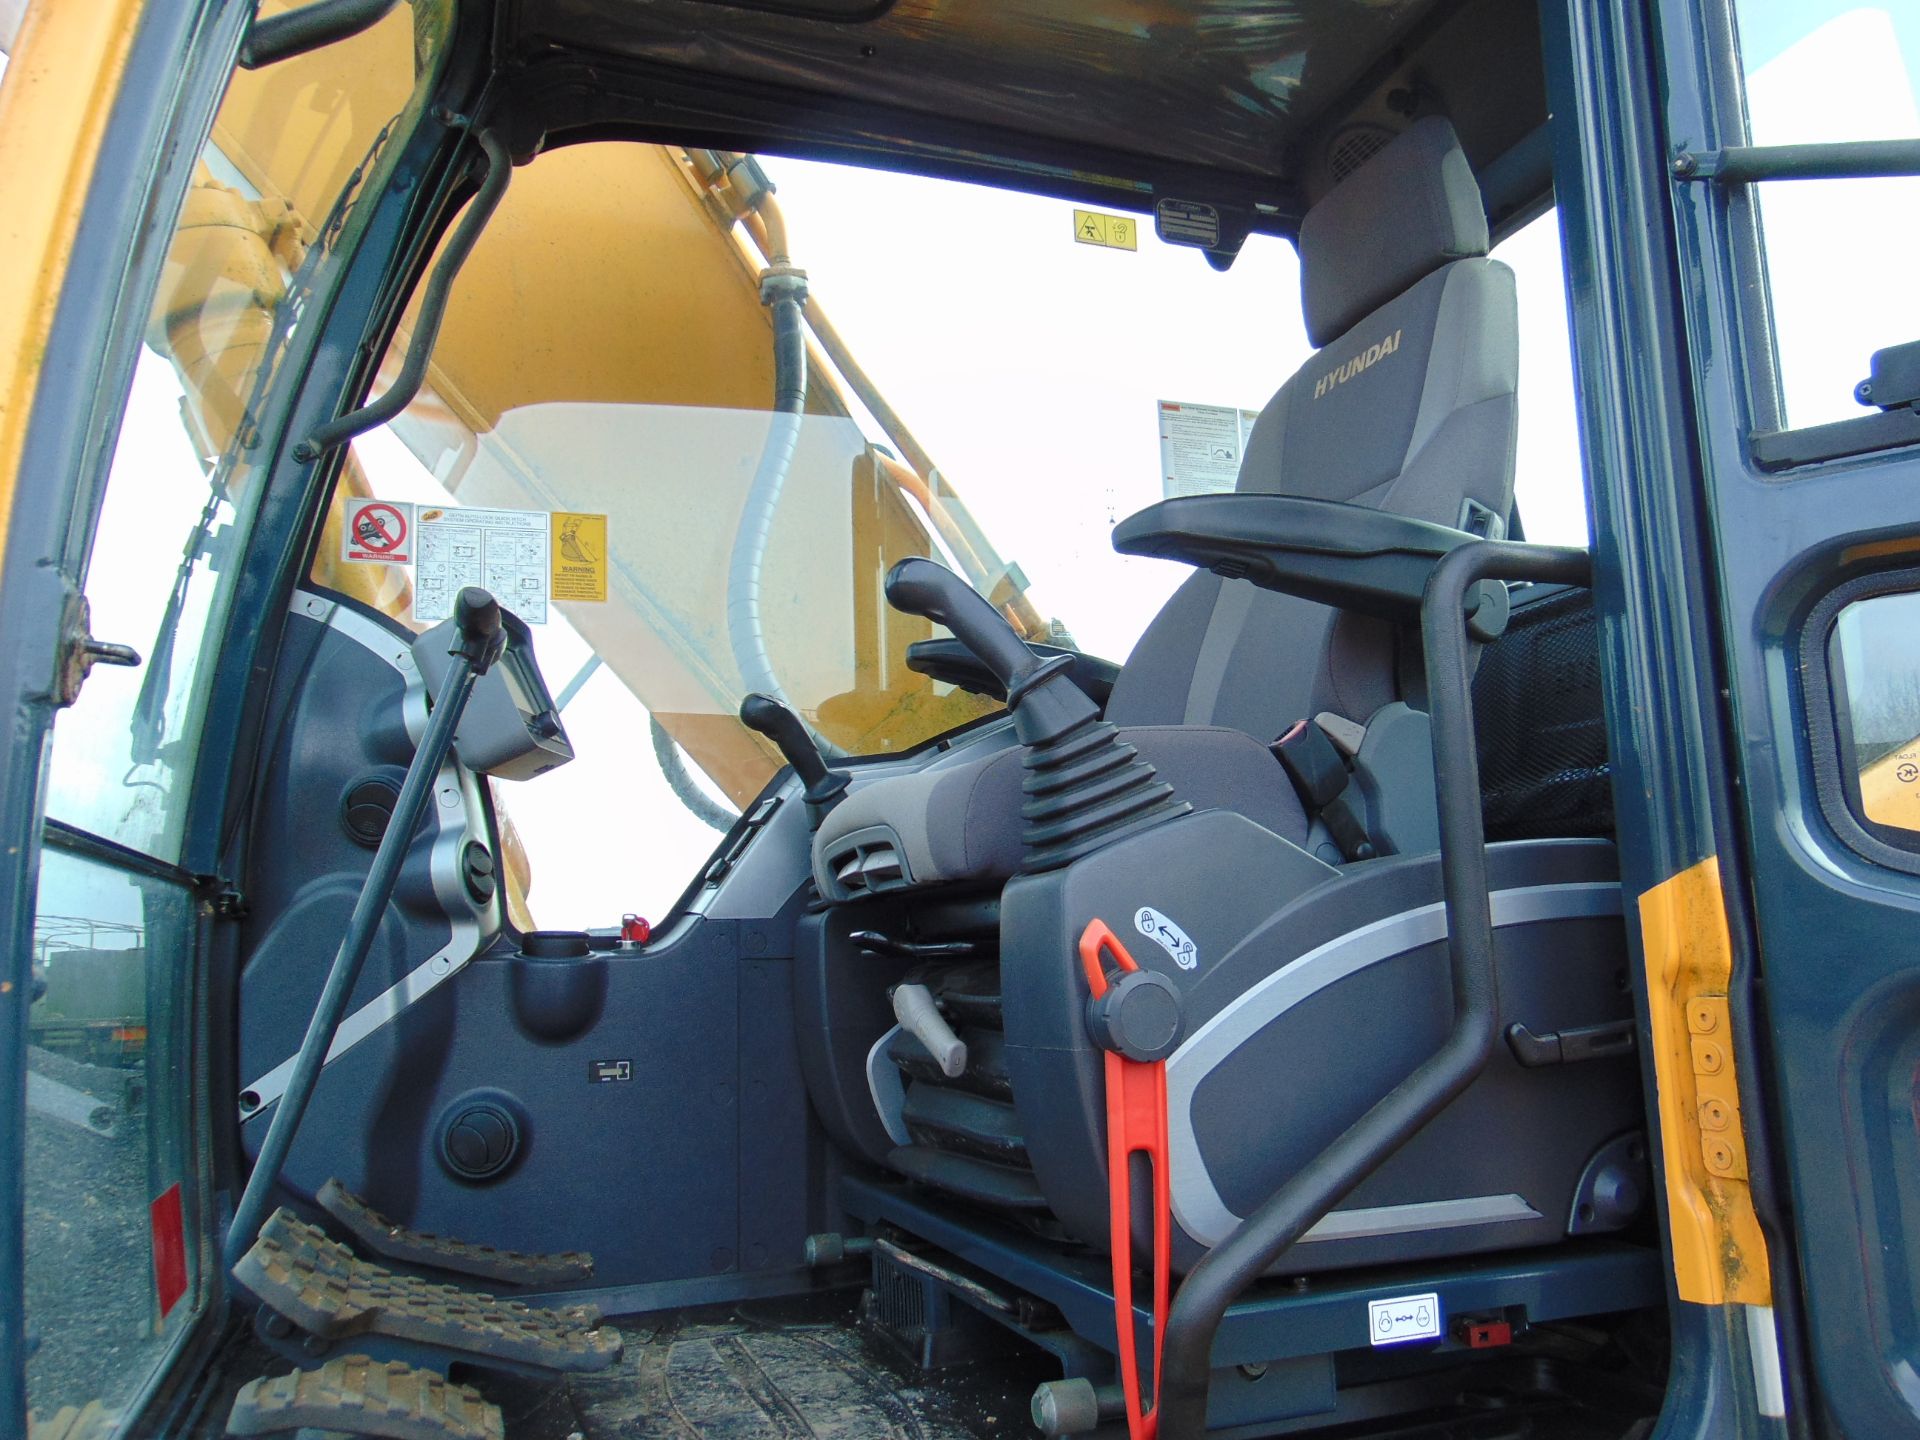 2012 Hyundai Robex 210 LC-9 Crawler Excavator ONLY 1,148 Hours Warranted. - Image 16 of 25